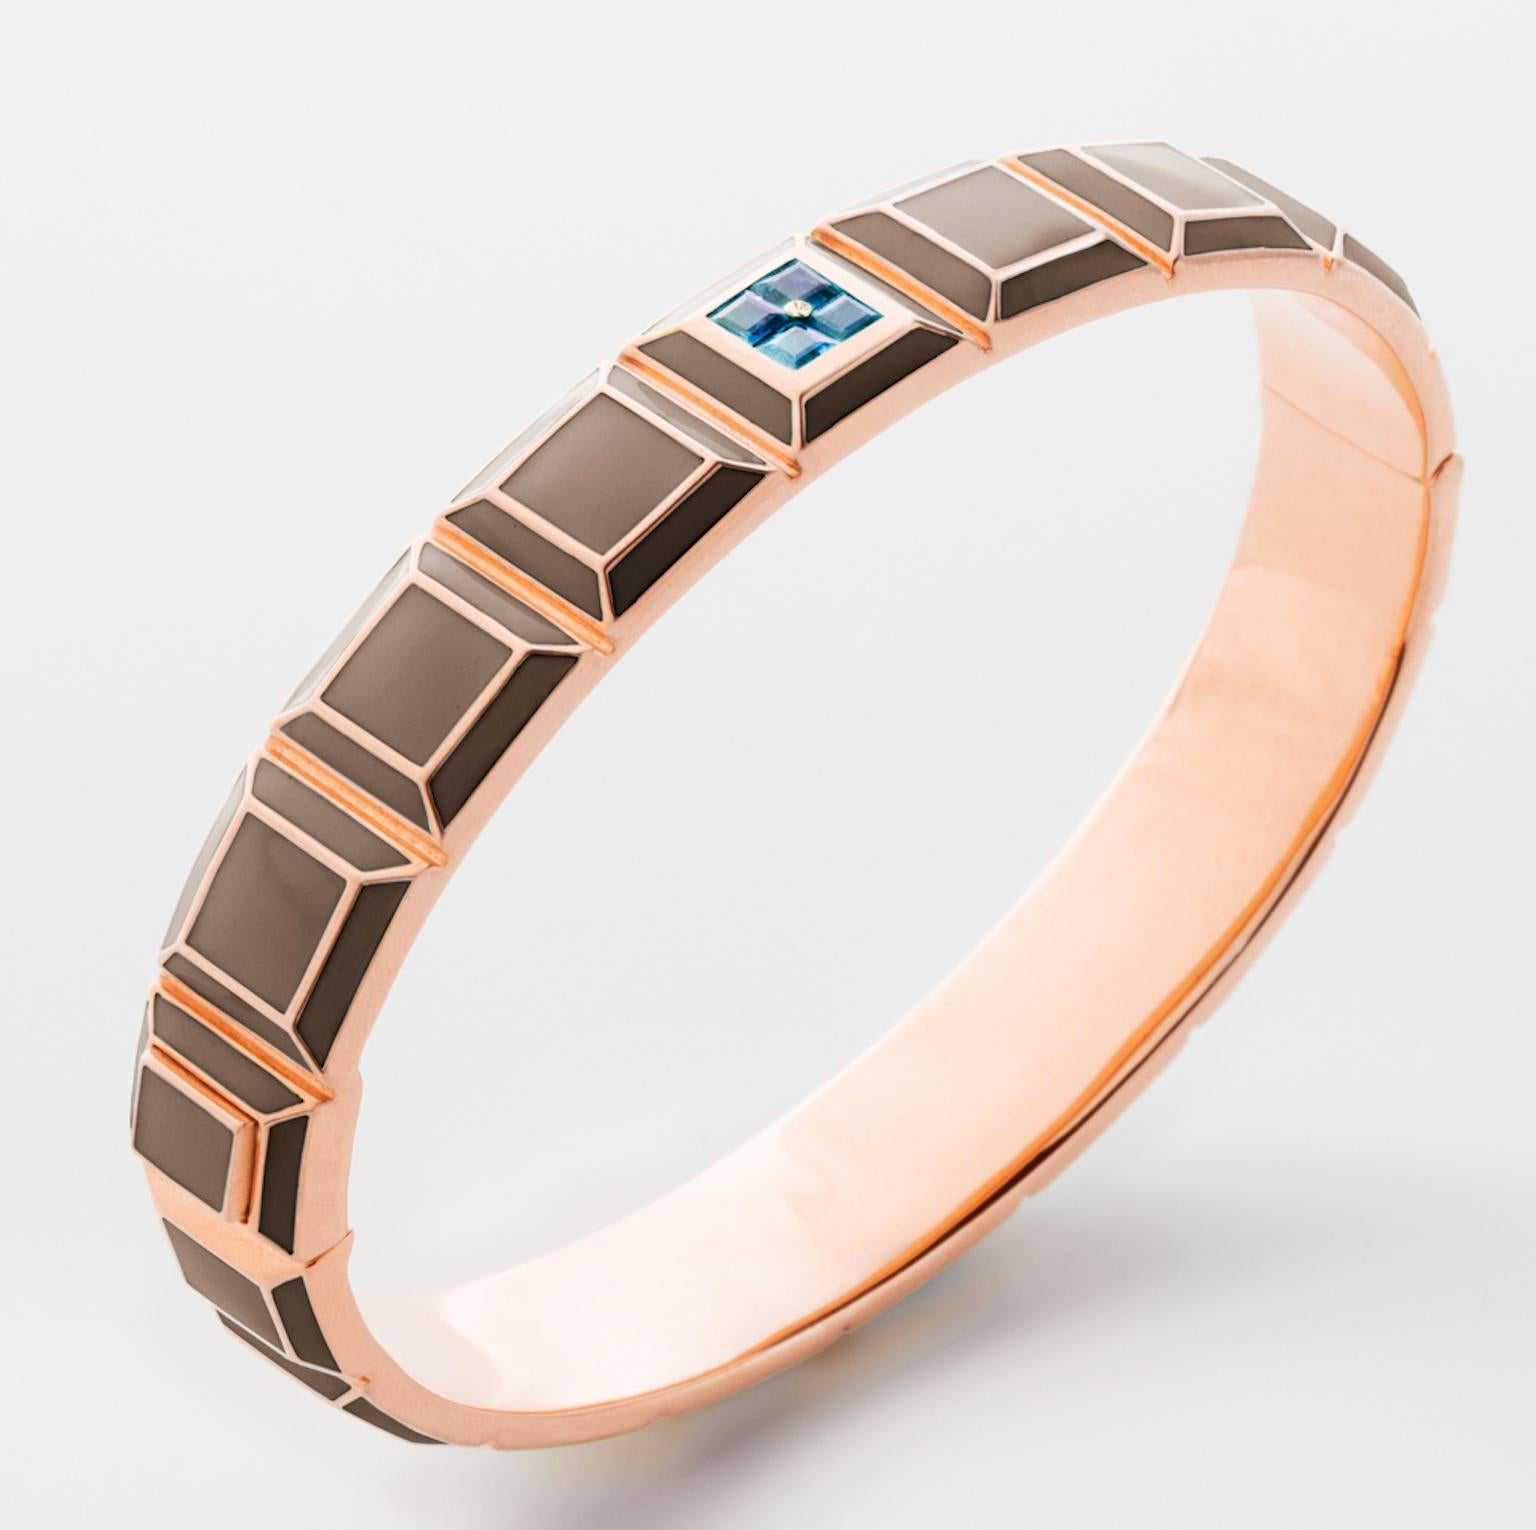 Gold-Plated Enamel Carousel Bracelet features a Rose Gold-Plated Silver bracelet with Taupe Enamel and Blue Topaz stones, along with a clasp closure that secures the bracelet onto the wearer's wrist. 
Yellow Gold Plated Silver, Taupe Enamel, Blue